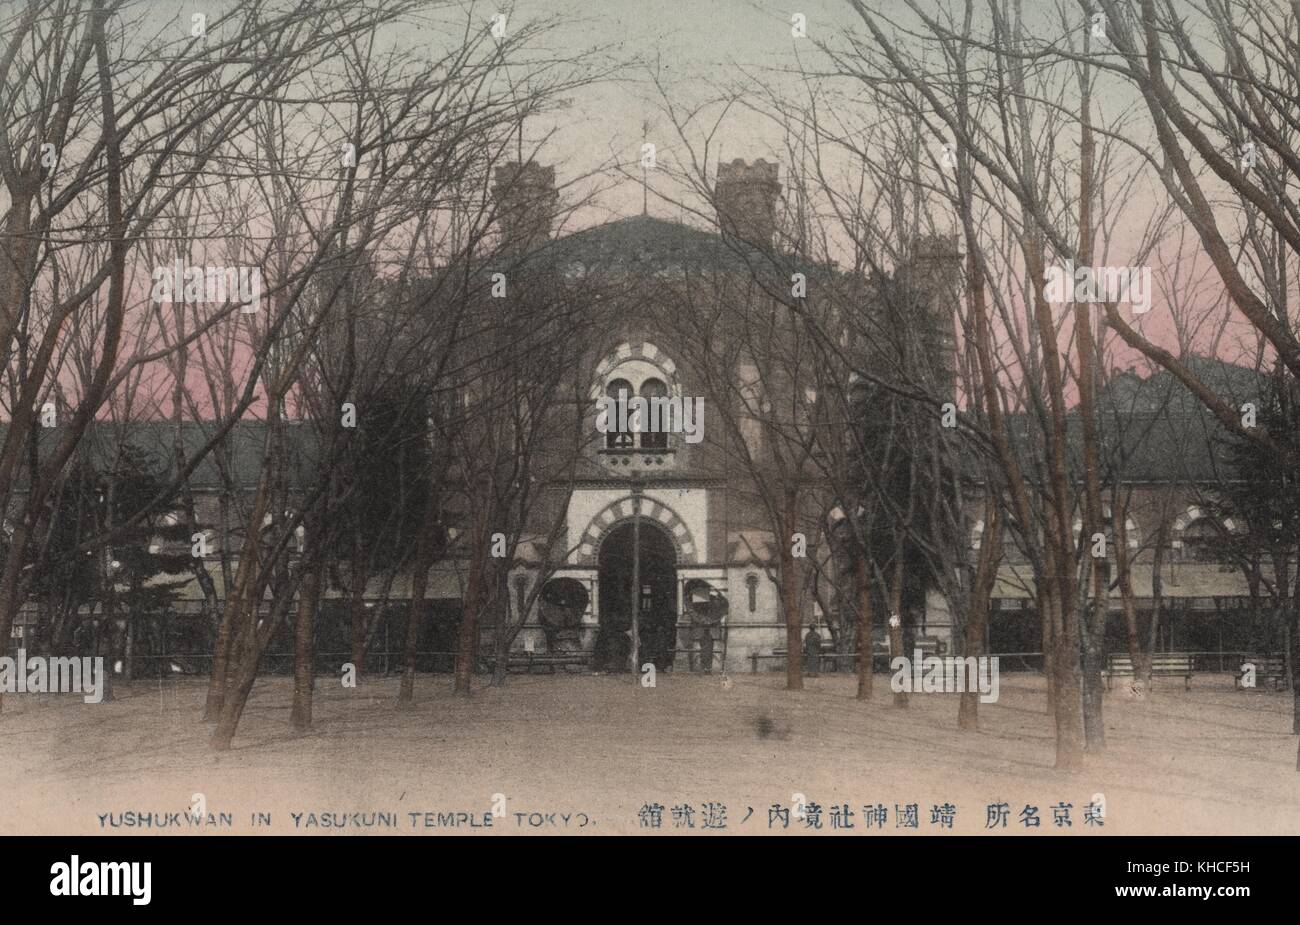 An old postcard picture of the front view of Yushukwan, museum of armament, which preserve and display Meiji Restoration-era artifacts of the Imperial Japanese Army, Yasukuni Temple, Tokyo, Japan, 1900. From the New York Public Library. Stock Photo